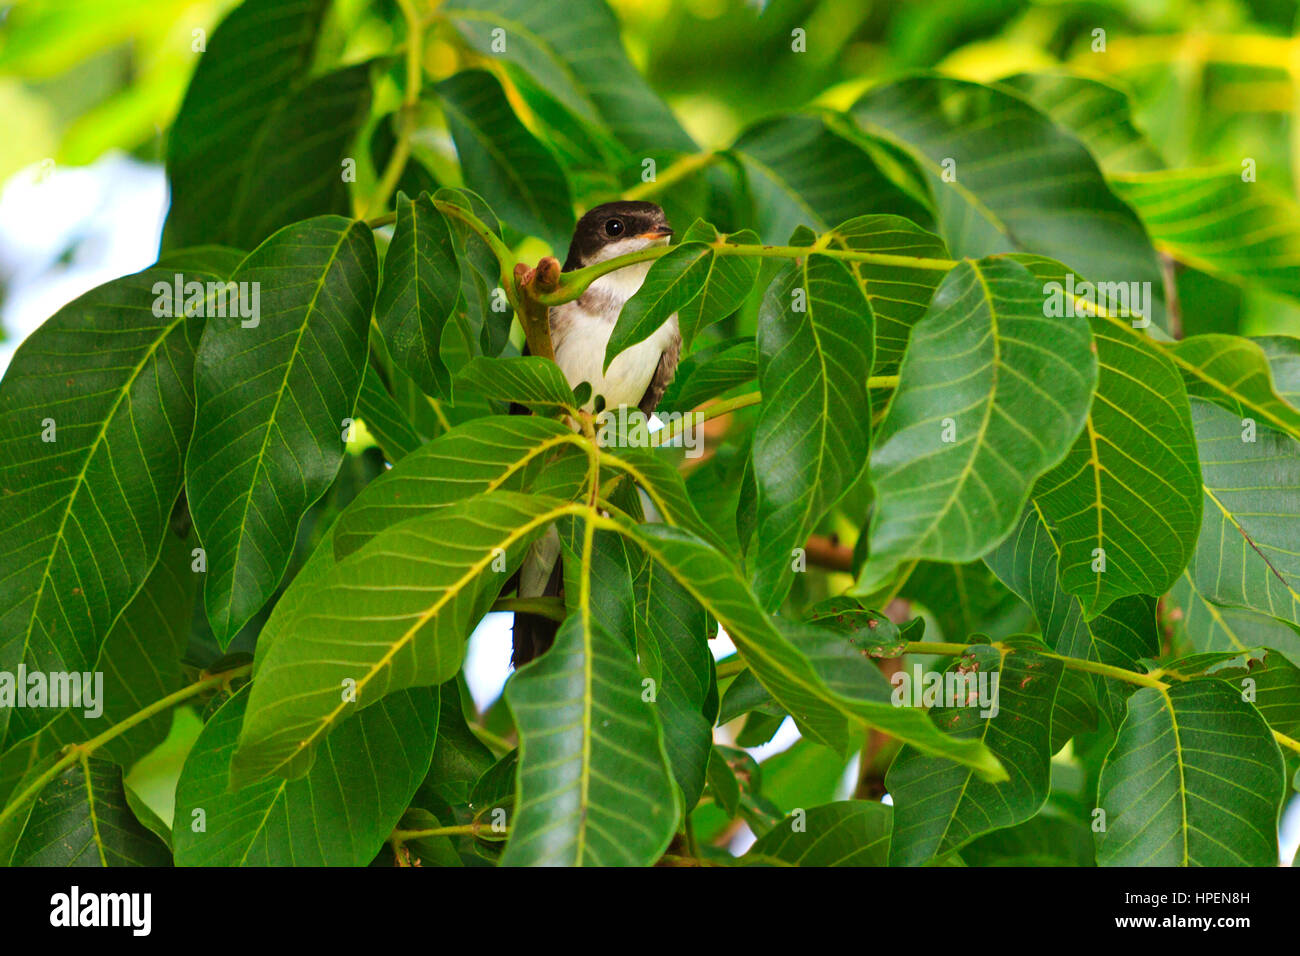 wild bird hid among juicy green leaves,shyness, caution, saturated colors, green concept Stock Photo